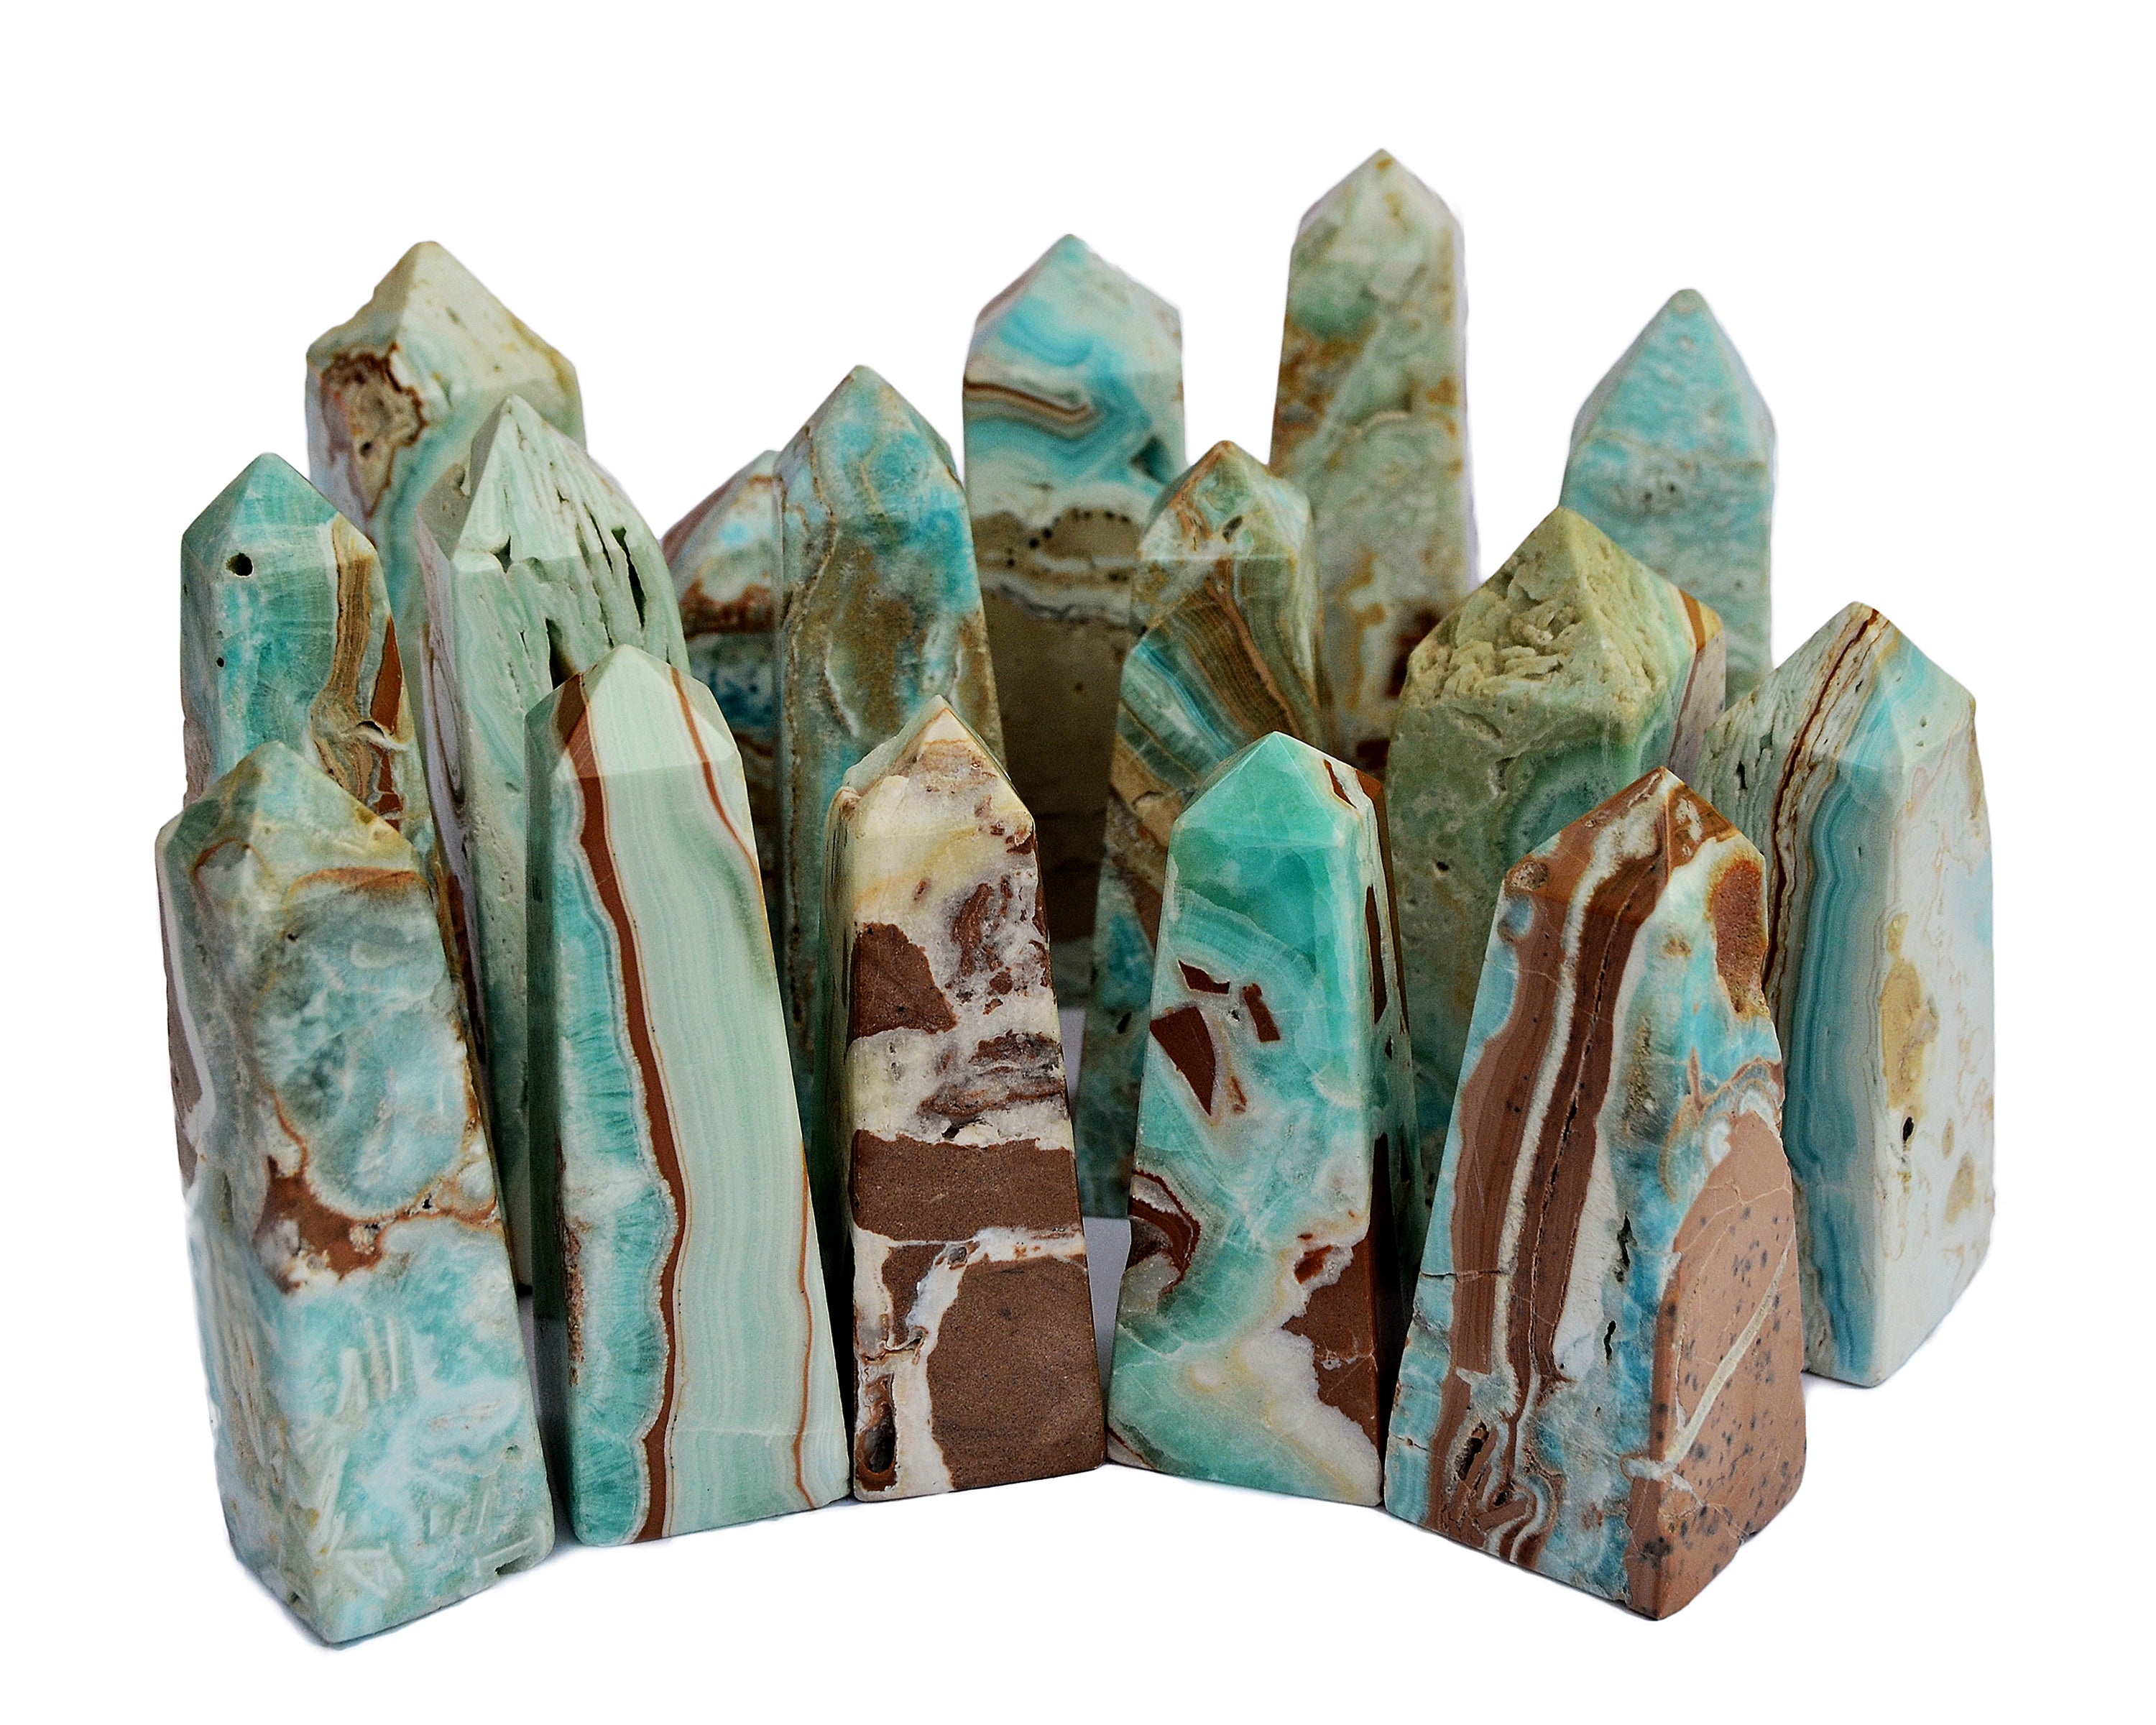 Several blue aragonite obelisks towers different sizes on white background